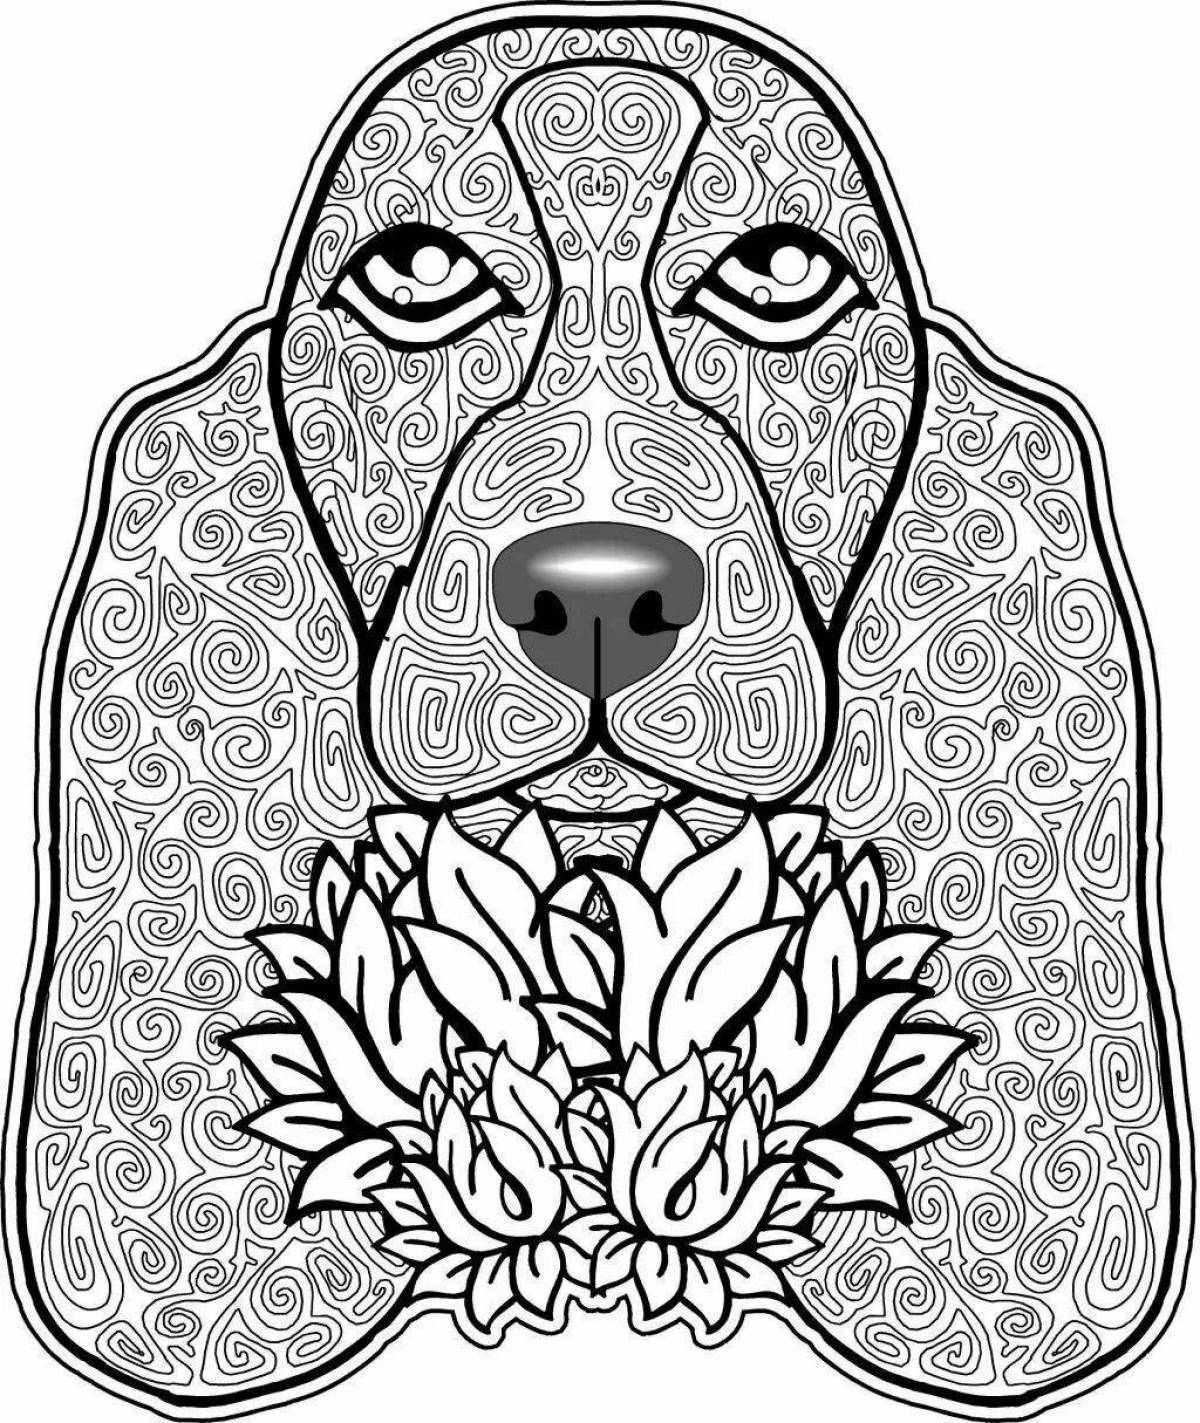 Colorful dog coloring page